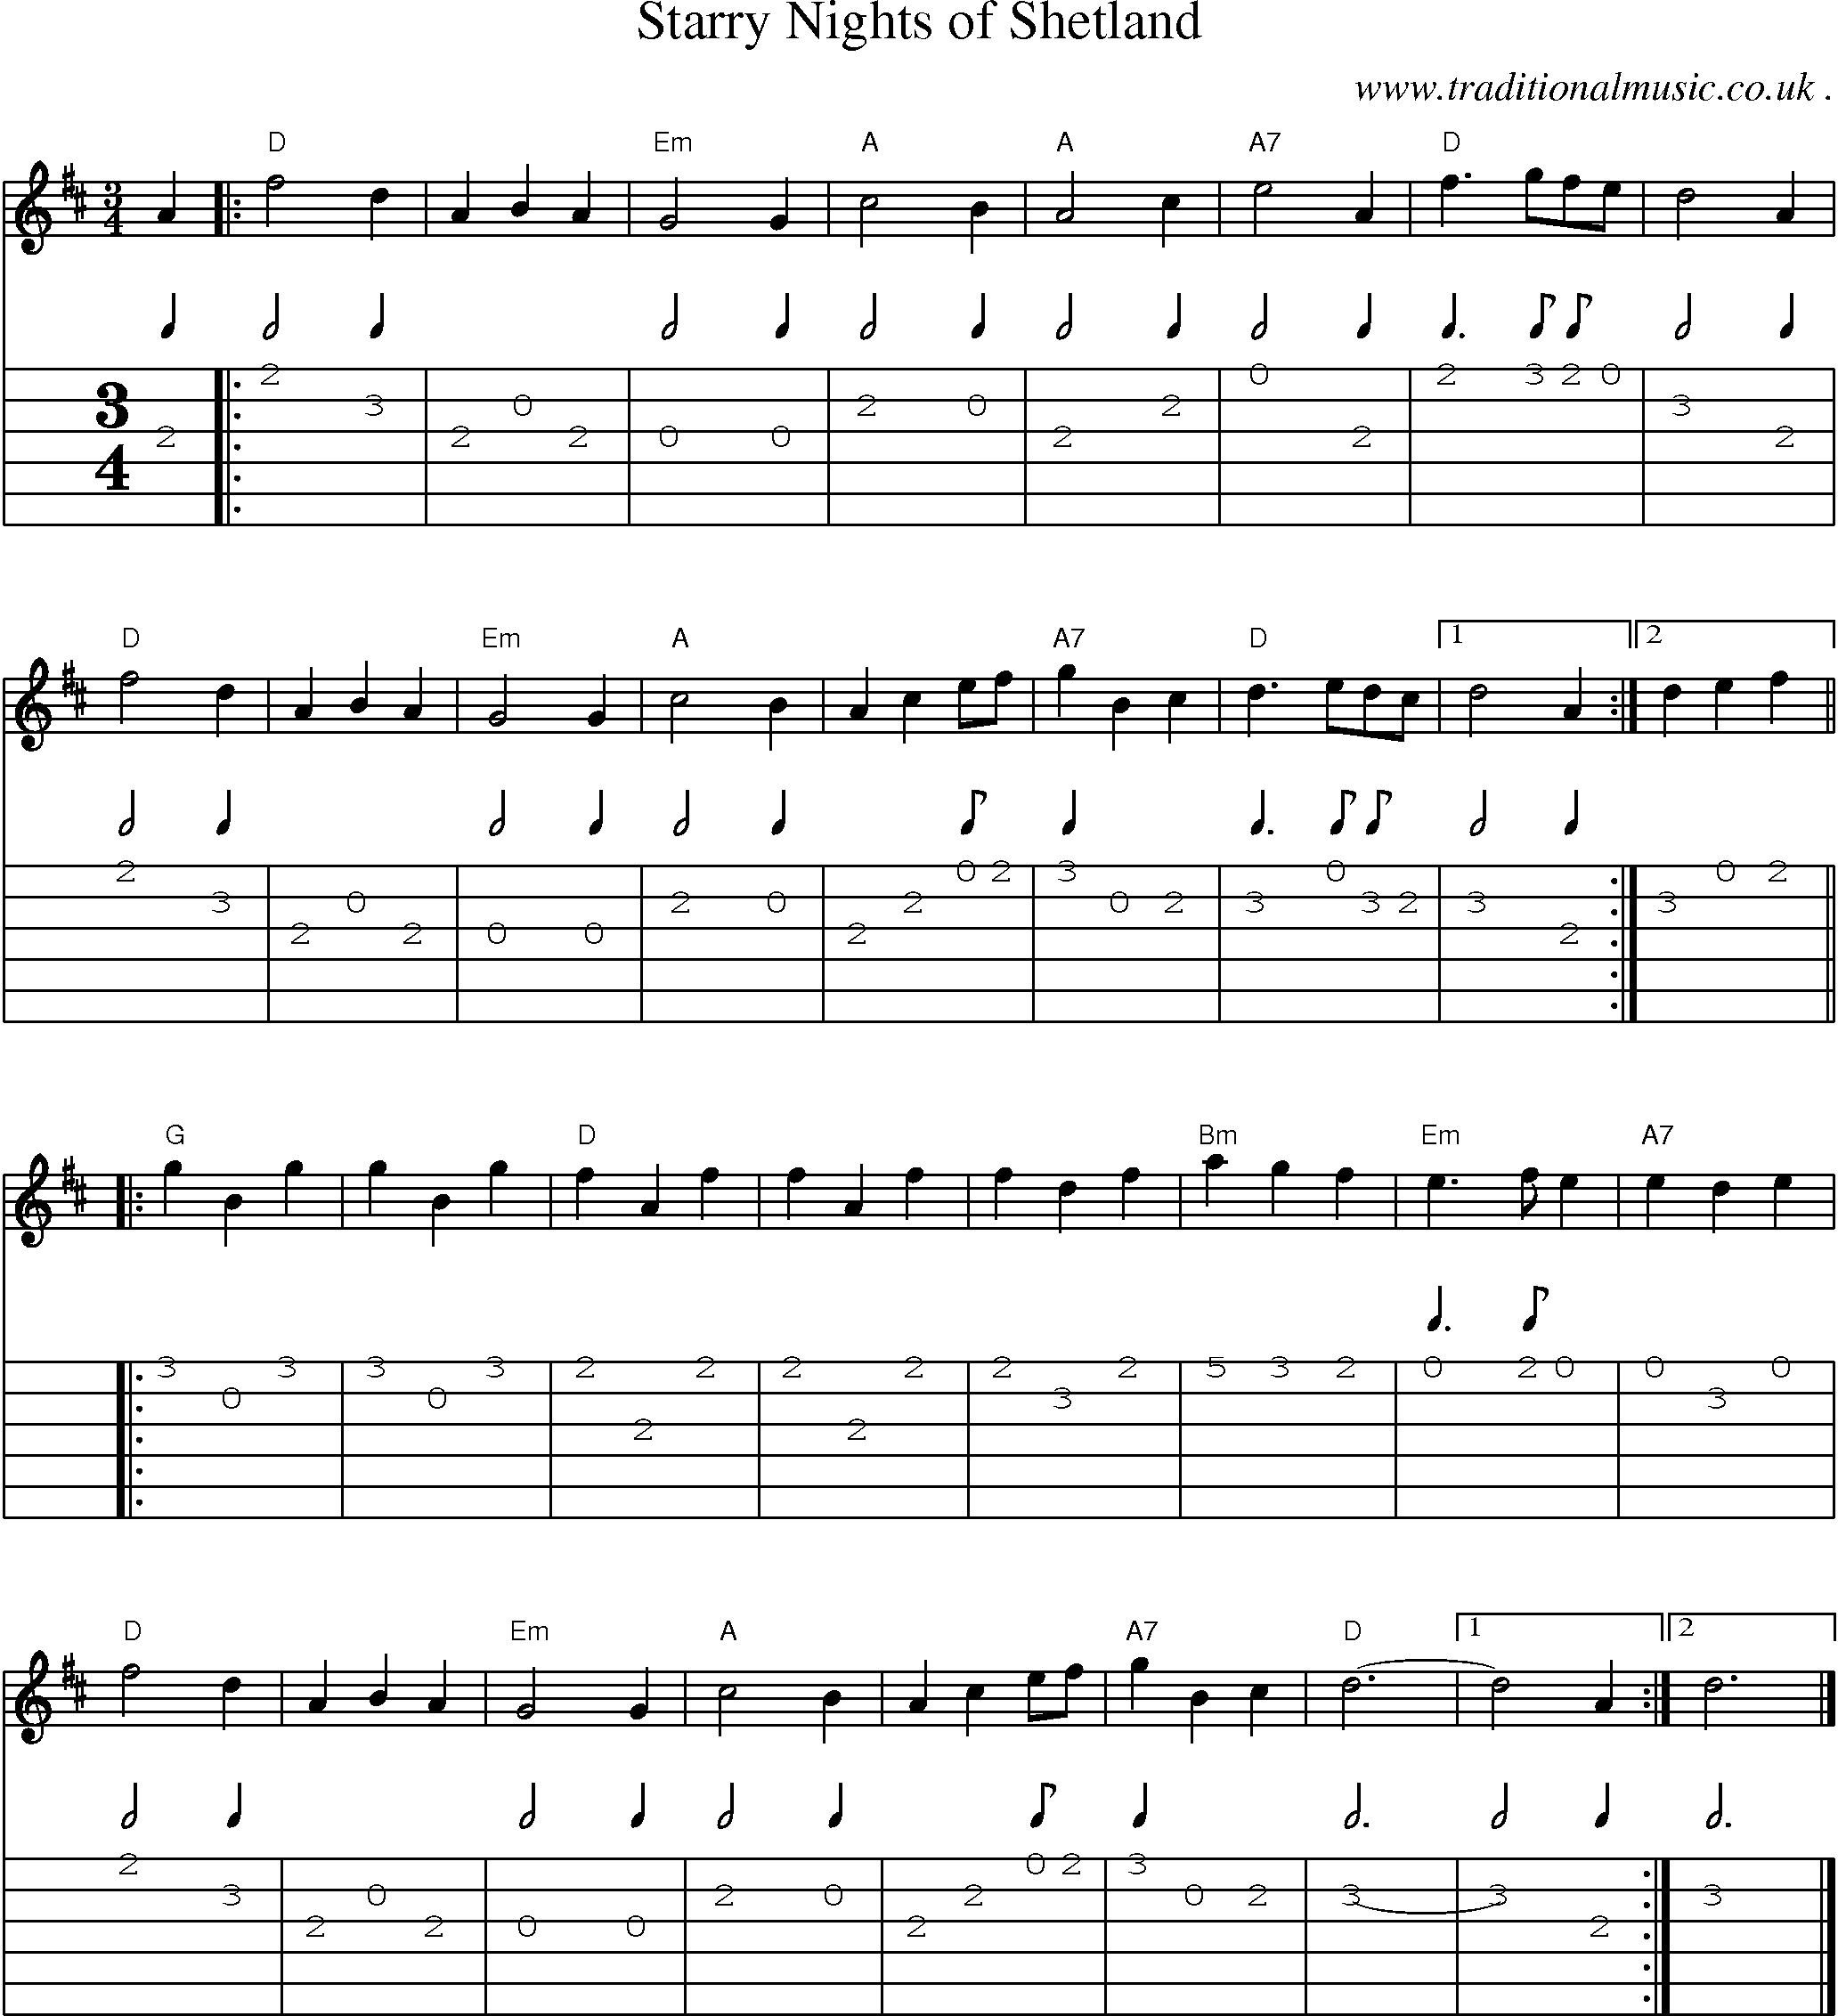 Music Score and Guitar Tabs for Starry Nights of Shetland